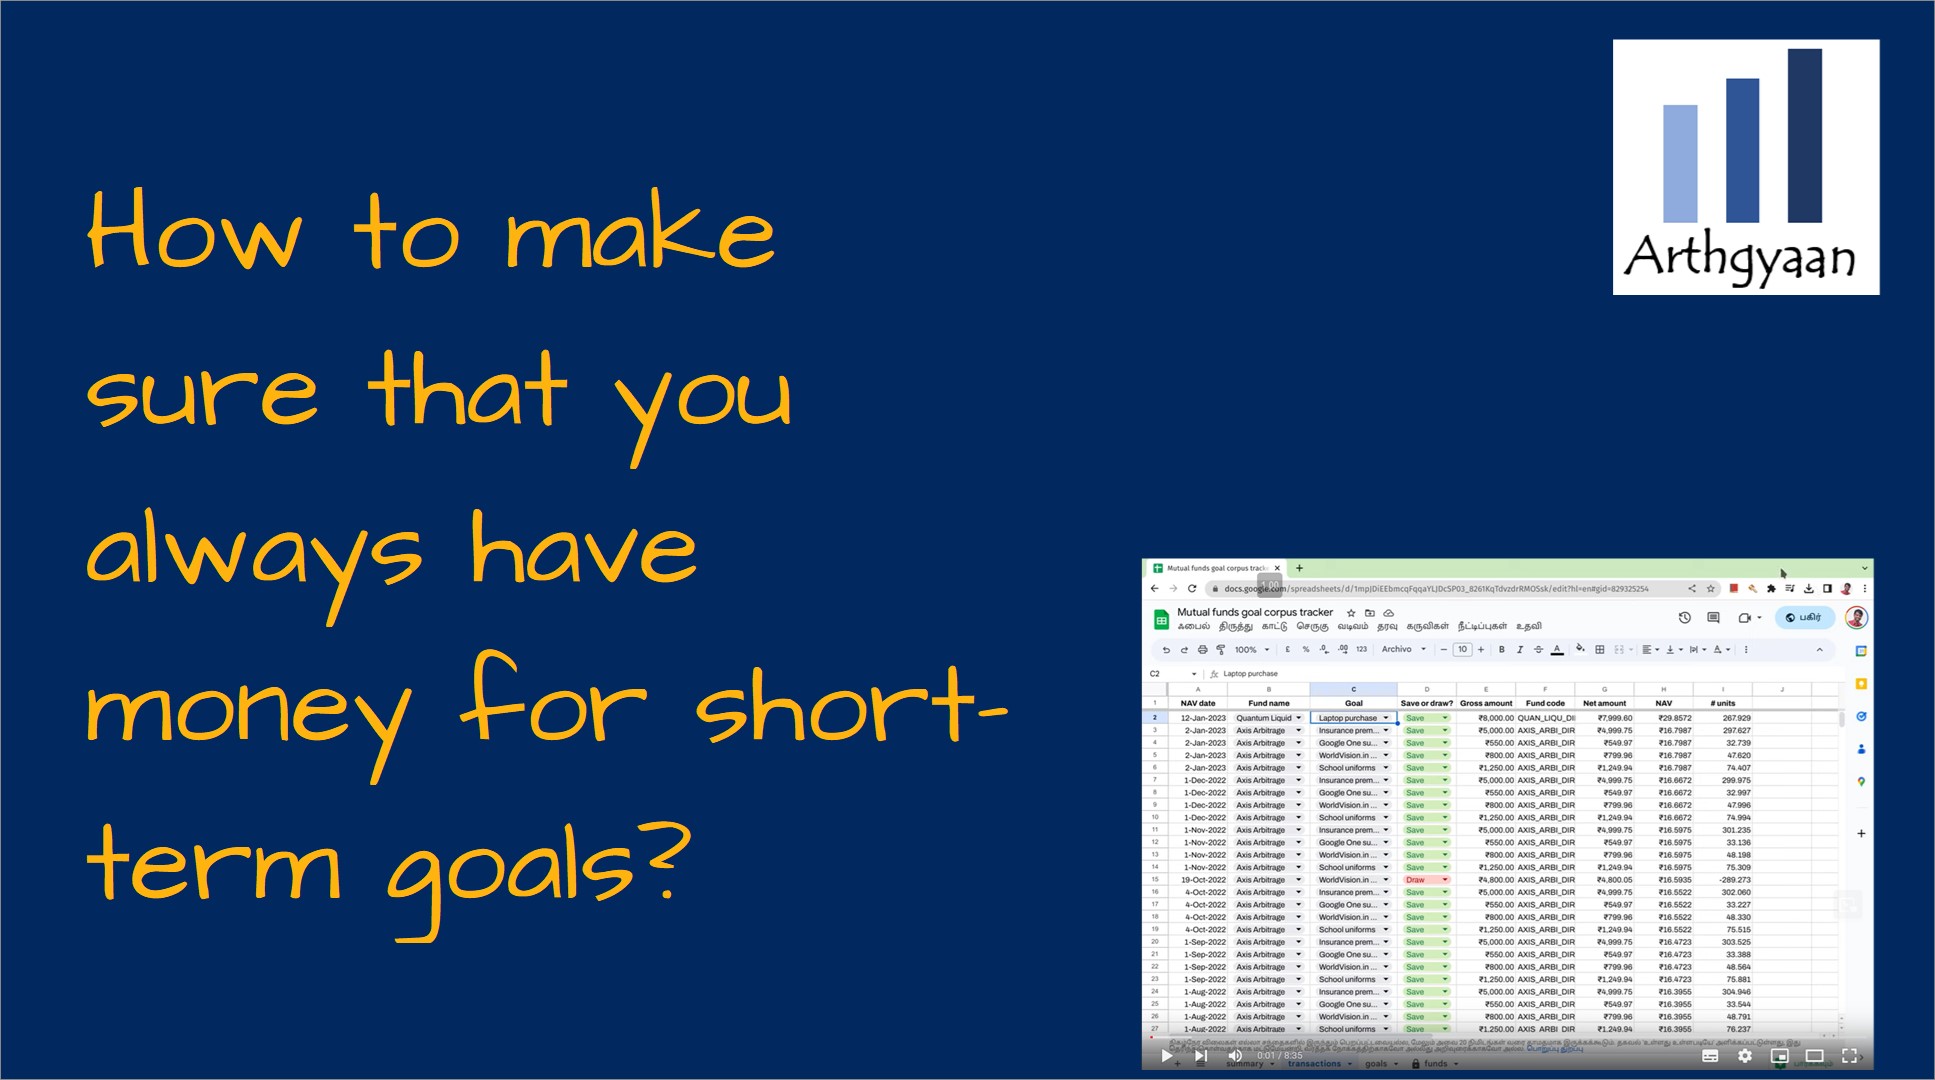 <p>This article gives you an easy-to-use tool to create, save and track short-term goals to make sure that you have money to spend on them.</p>

